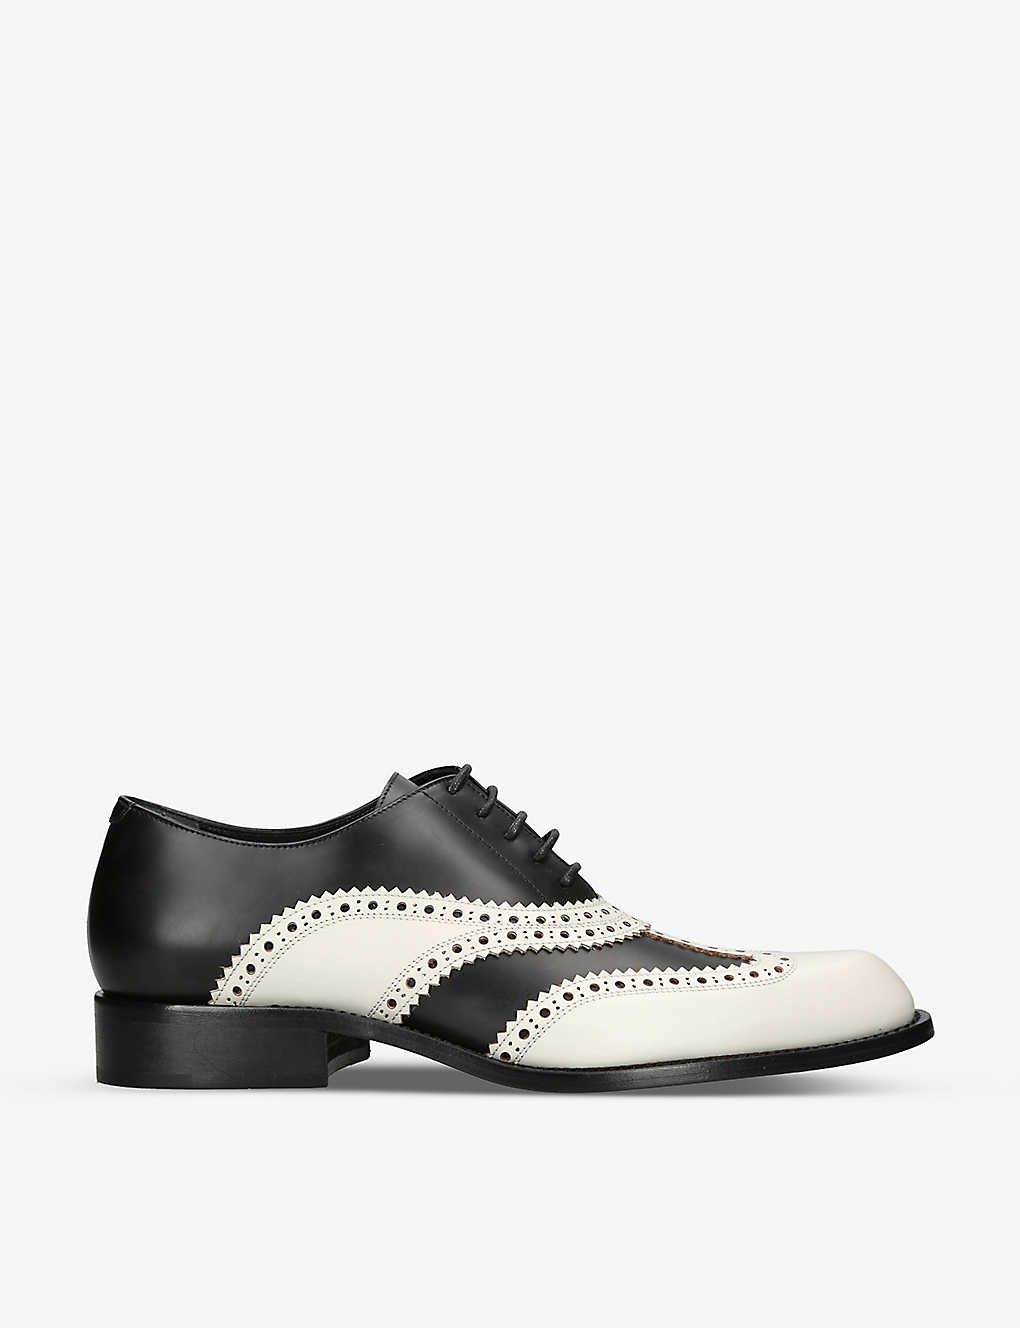 DRIES VAN NOTEN PERFORATED-PANEL ROUND-TOE LEATHER BROGUES,65694061